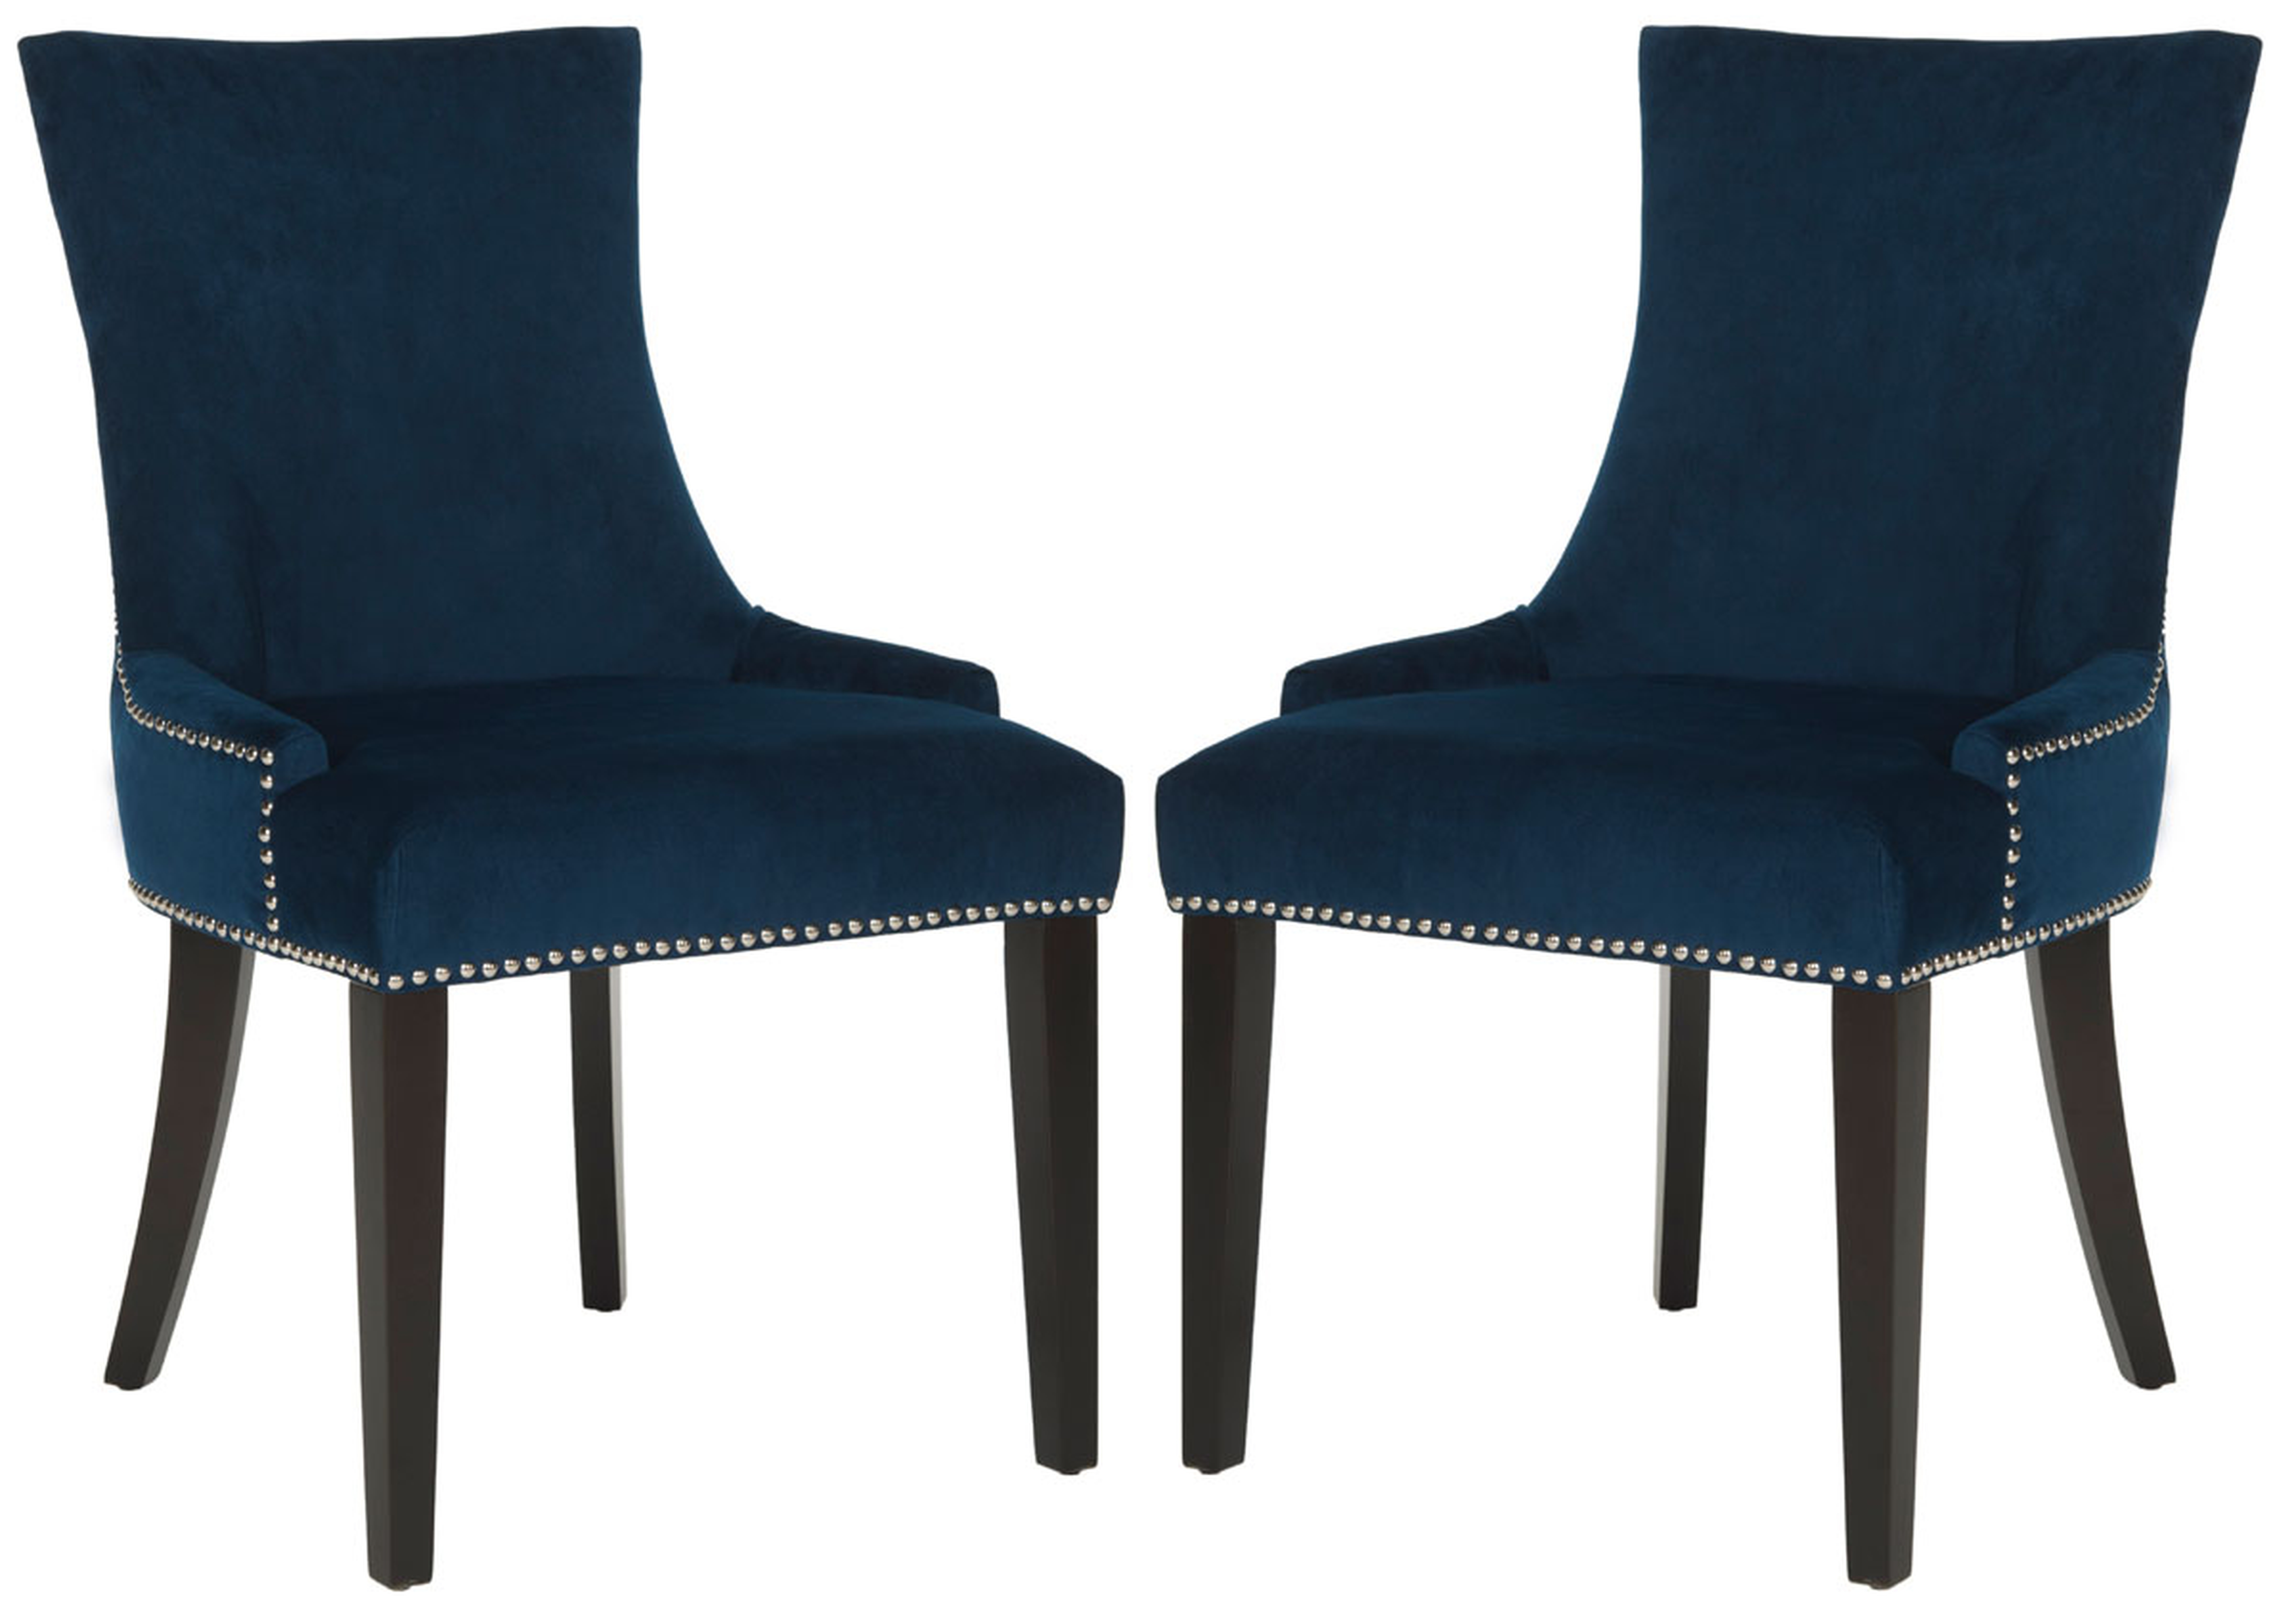 LESTER 19"H DINING CHAIR (SET OF 2) - Navy - Arlo Home